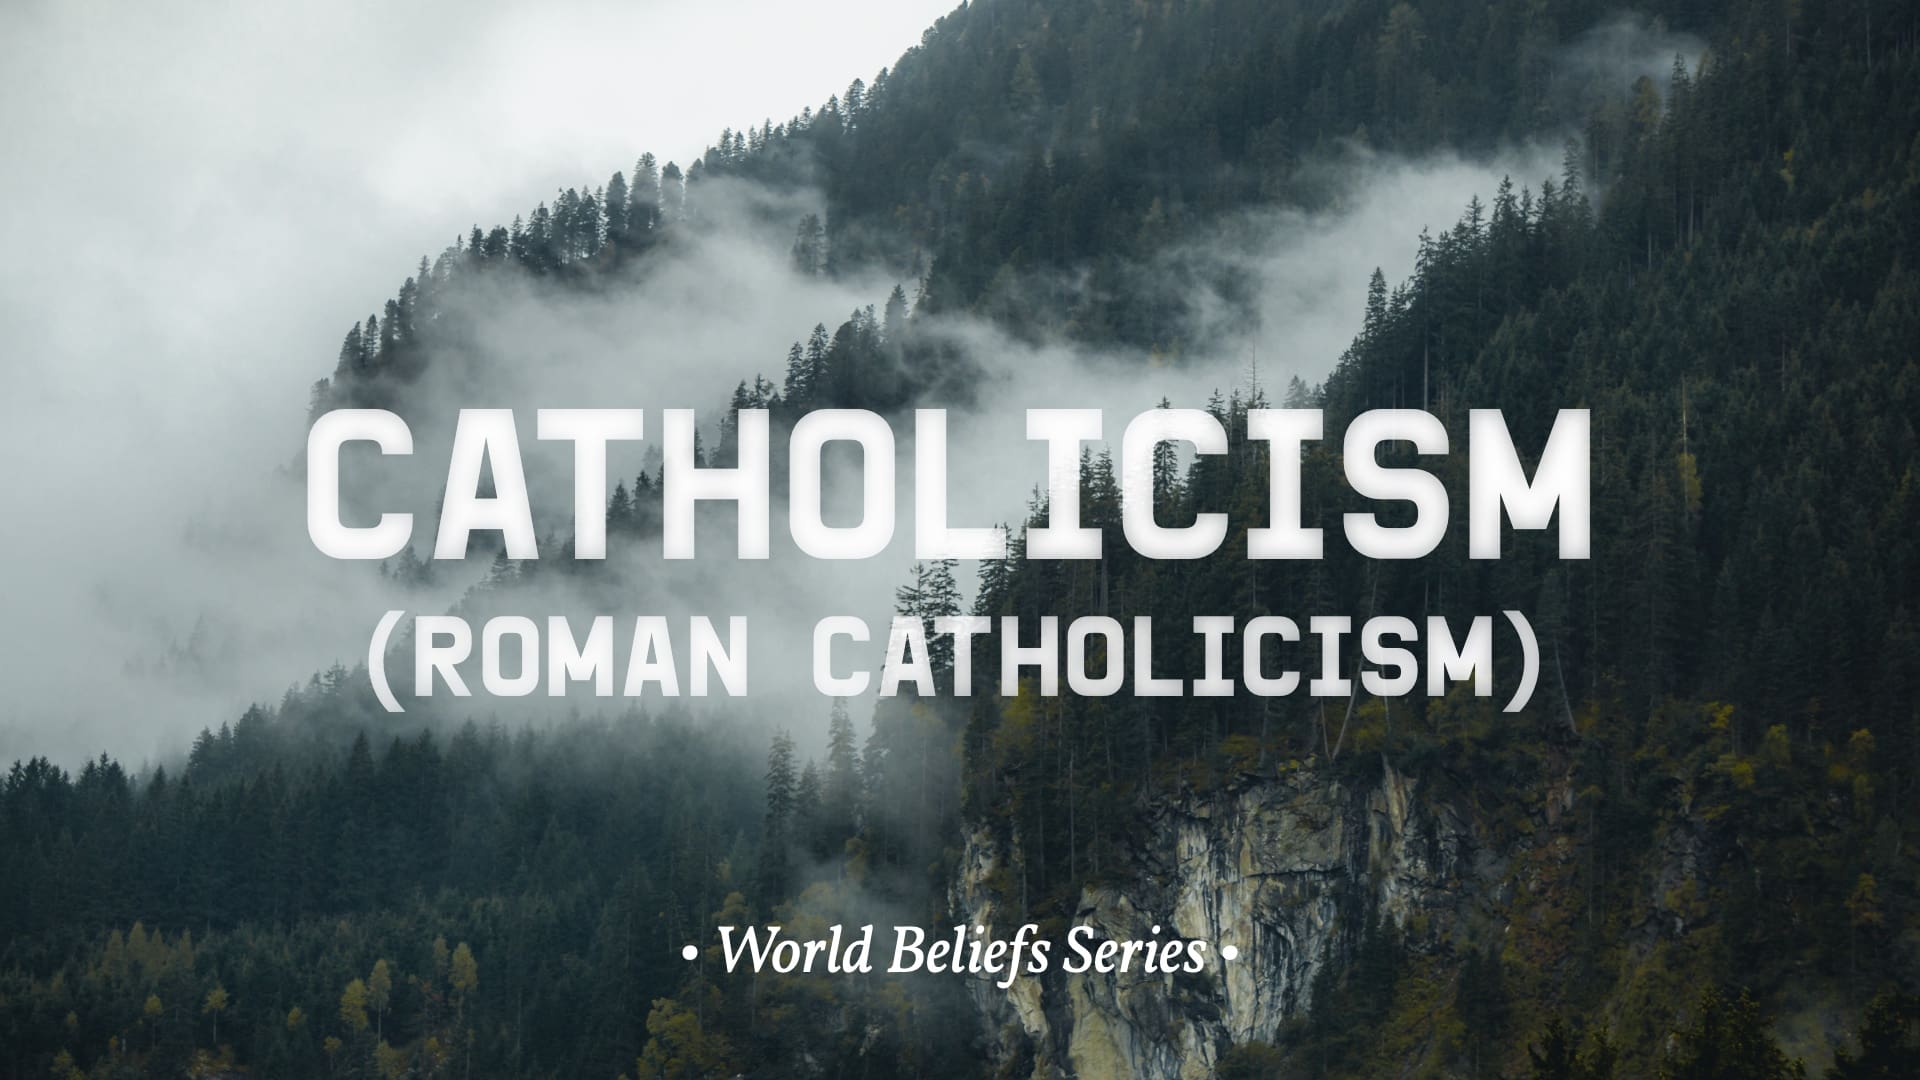 What is Roman Catholicism?